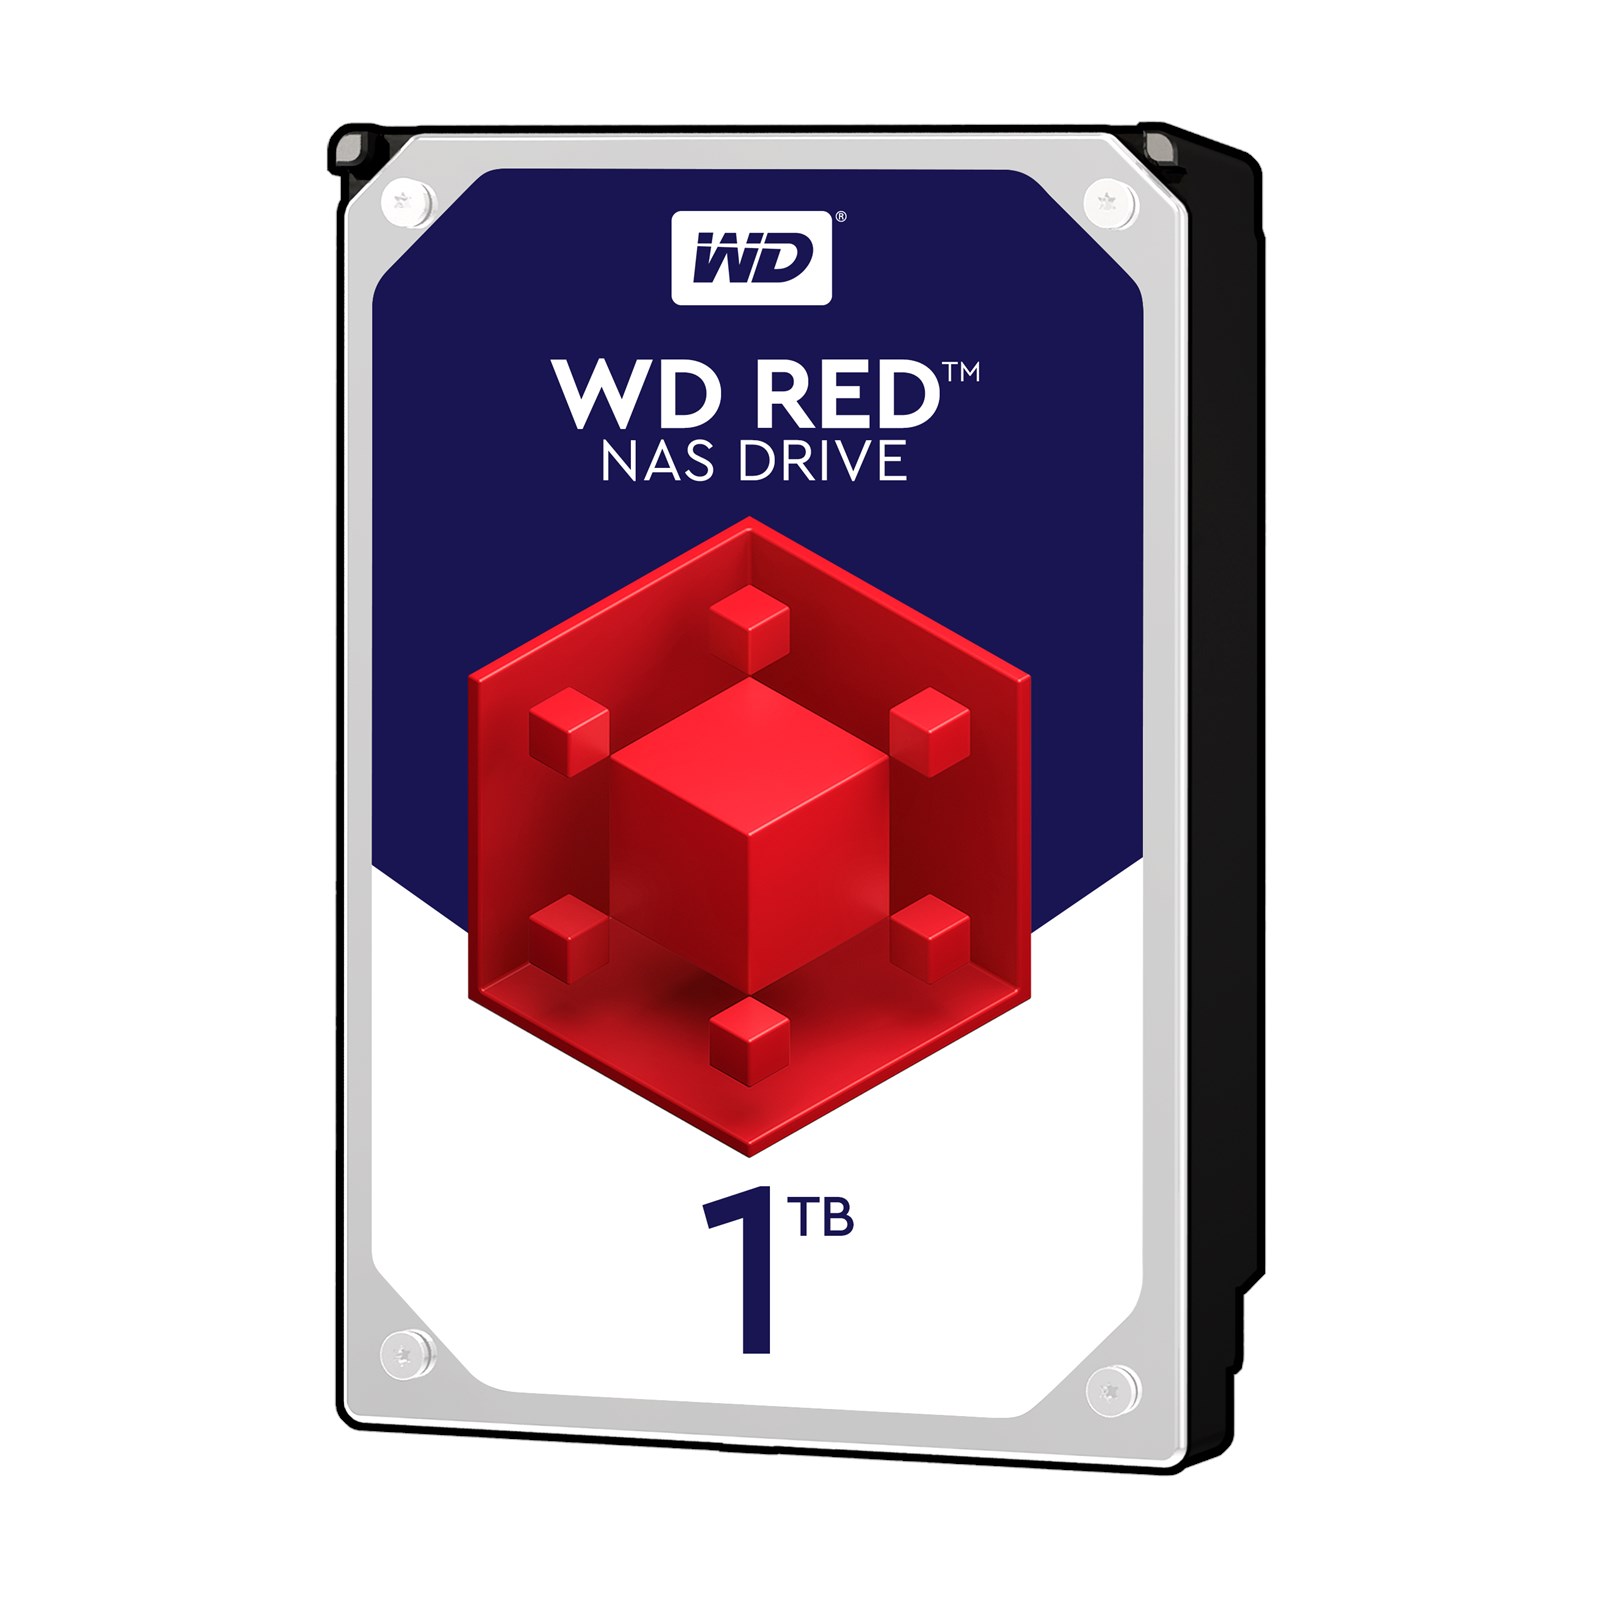 WD%20RED%201TB%205400RPM%2064MB%20SATA3%206Gbit/sn%20WD10EFRX%20NAS%20HDD